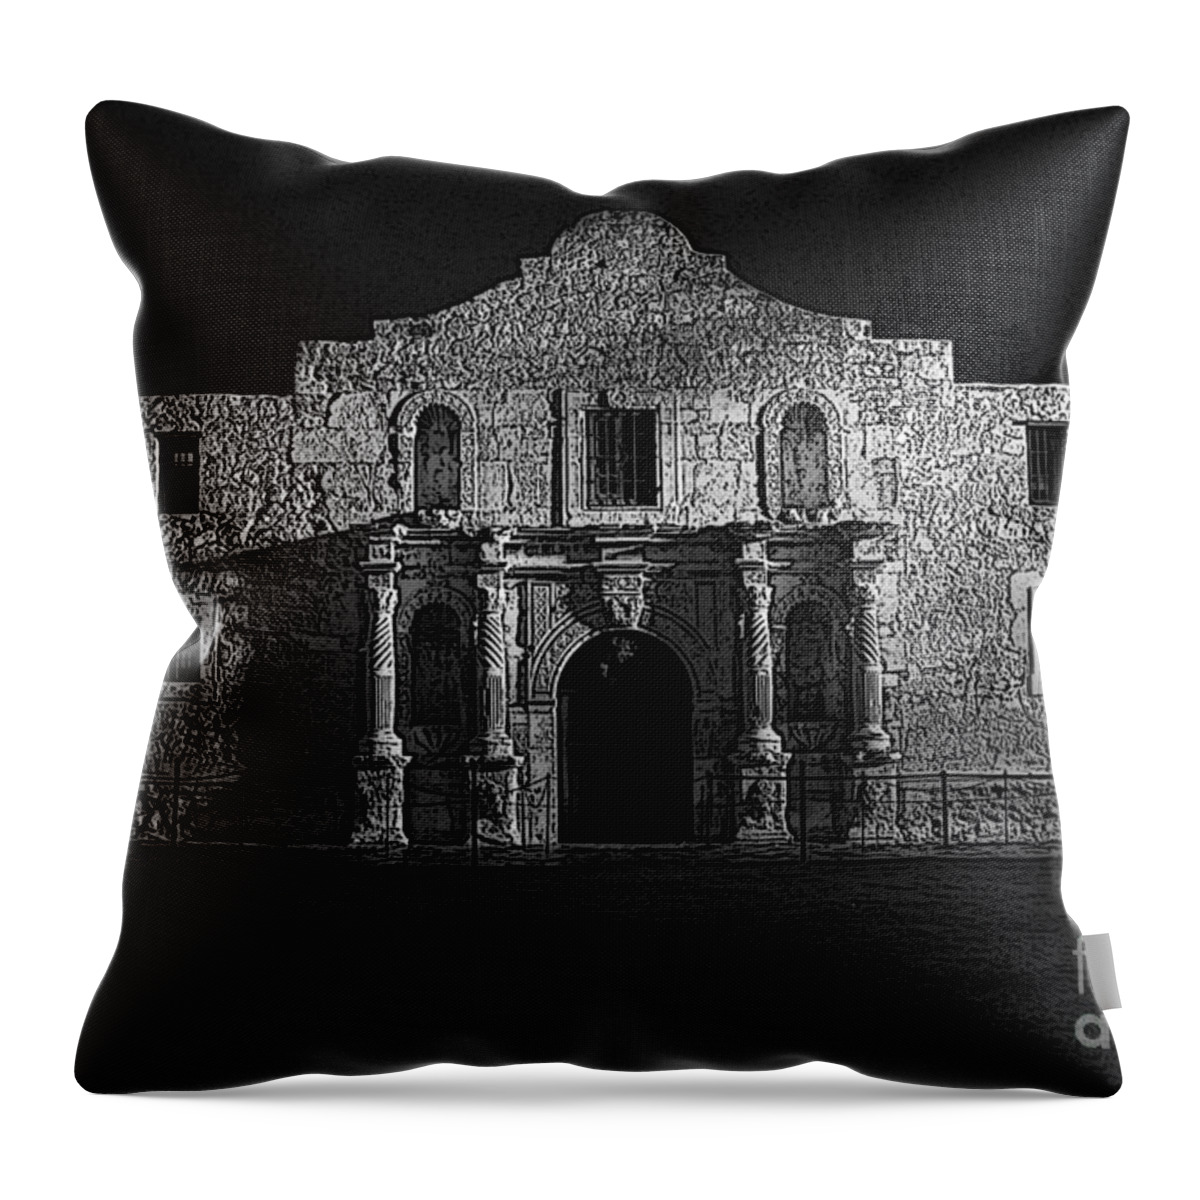 Alamo Throw Pillow featuring the digital art Alamo Mission Entrance Front Profile at Night in San Antonio Texas BW Poster Edges Digital Art by Shawn O'Brien